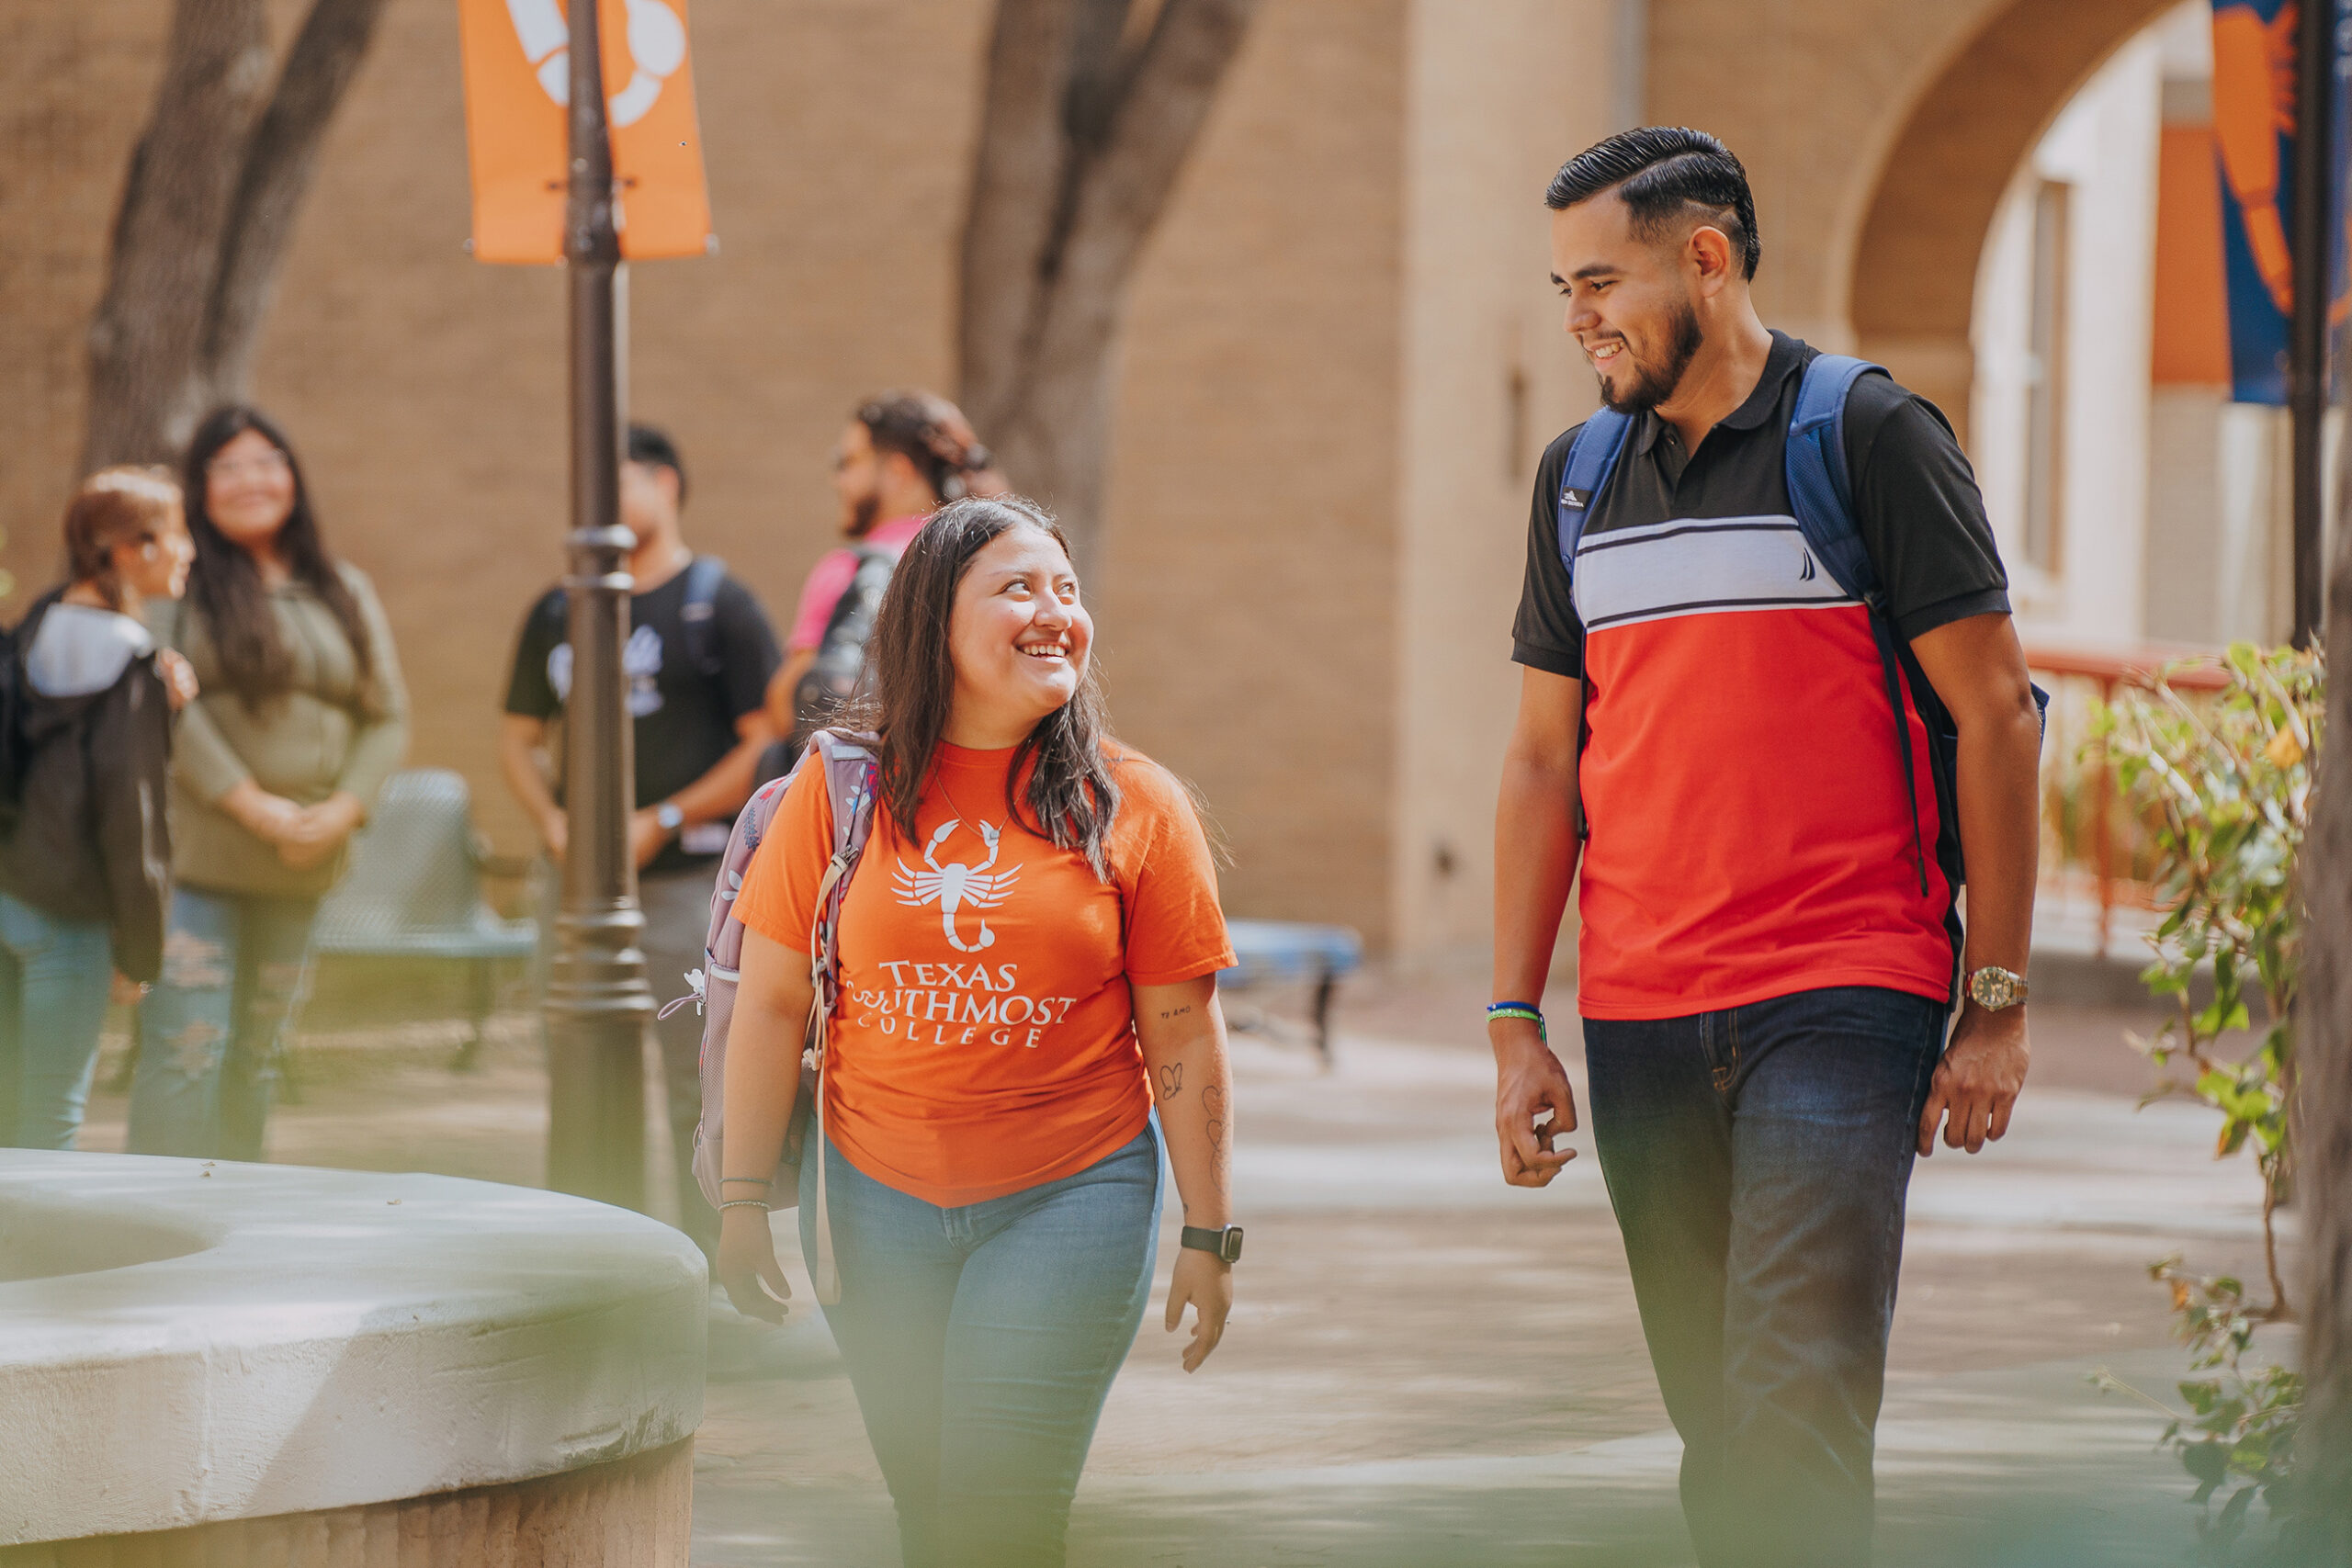 The process of applying for Free Application for Federal Student Aid (FAFSA) has changed, allowing more students to qualify and get larger financial aid packages. Photo by  Esteban Del Angel / Texas Southmost College